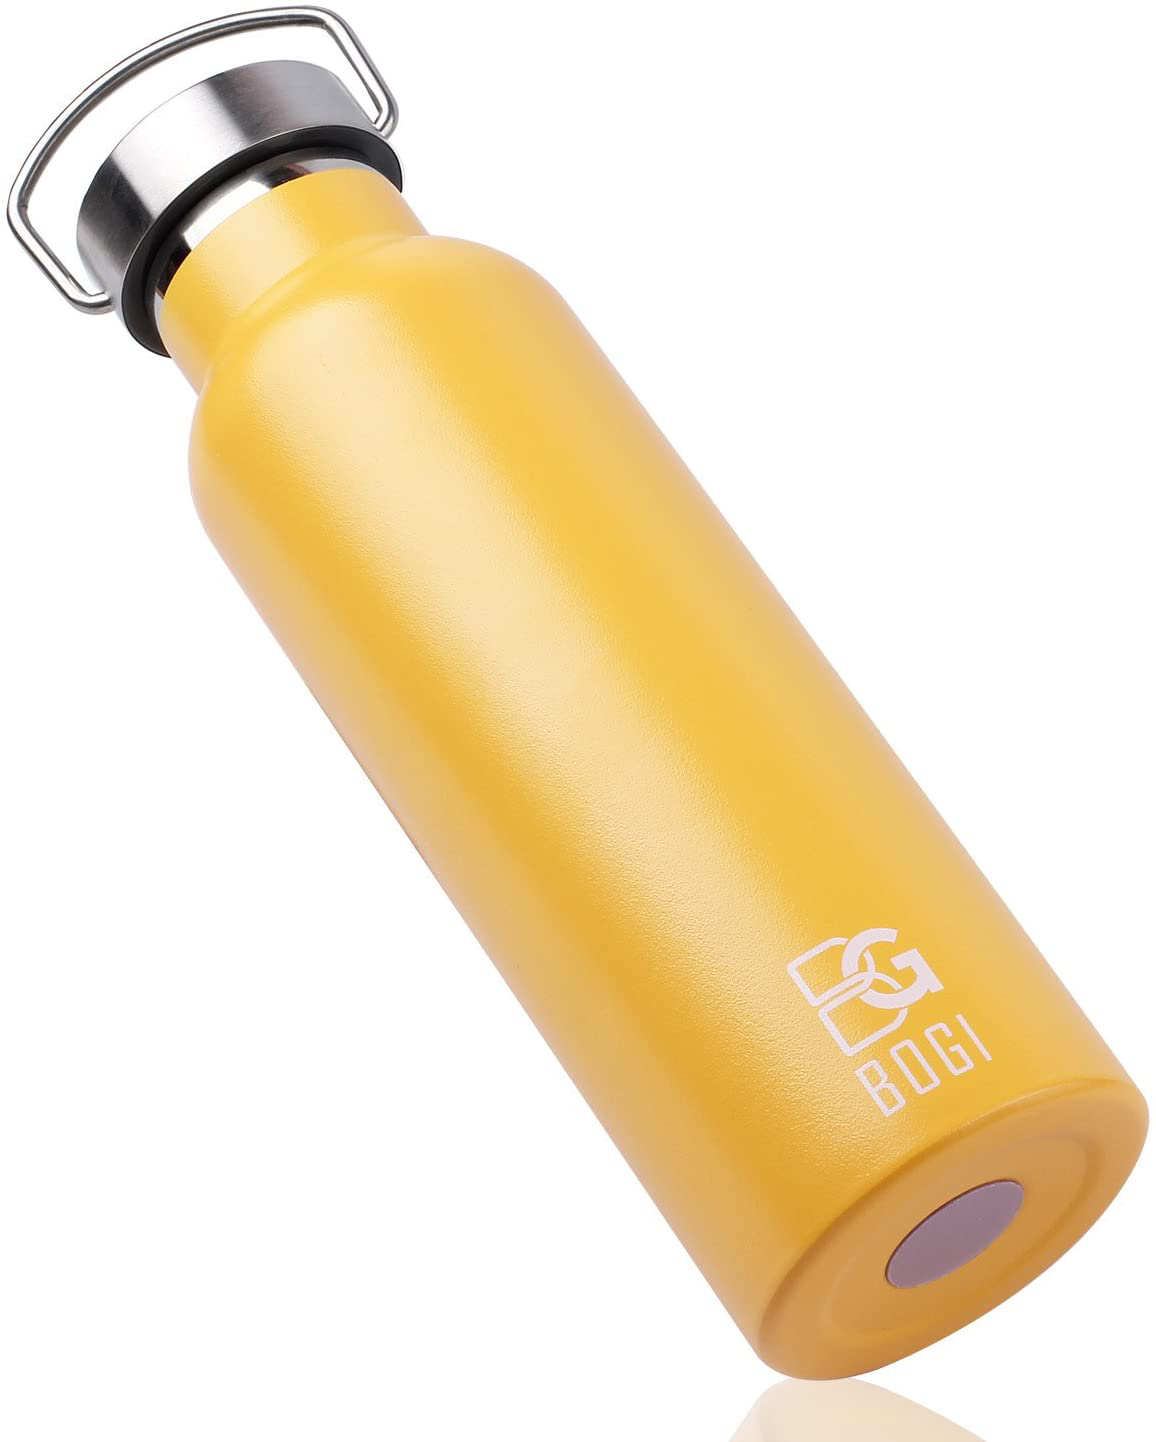 BOGI 20oz Double Wall Vacuum Insulated Stainless Steel Water Bottle-Scratch Resistance&Eco-Friendly for Outdoor Sports Yoga Camping+Straw Flip Cap,2 Straw&Cleaning Brush